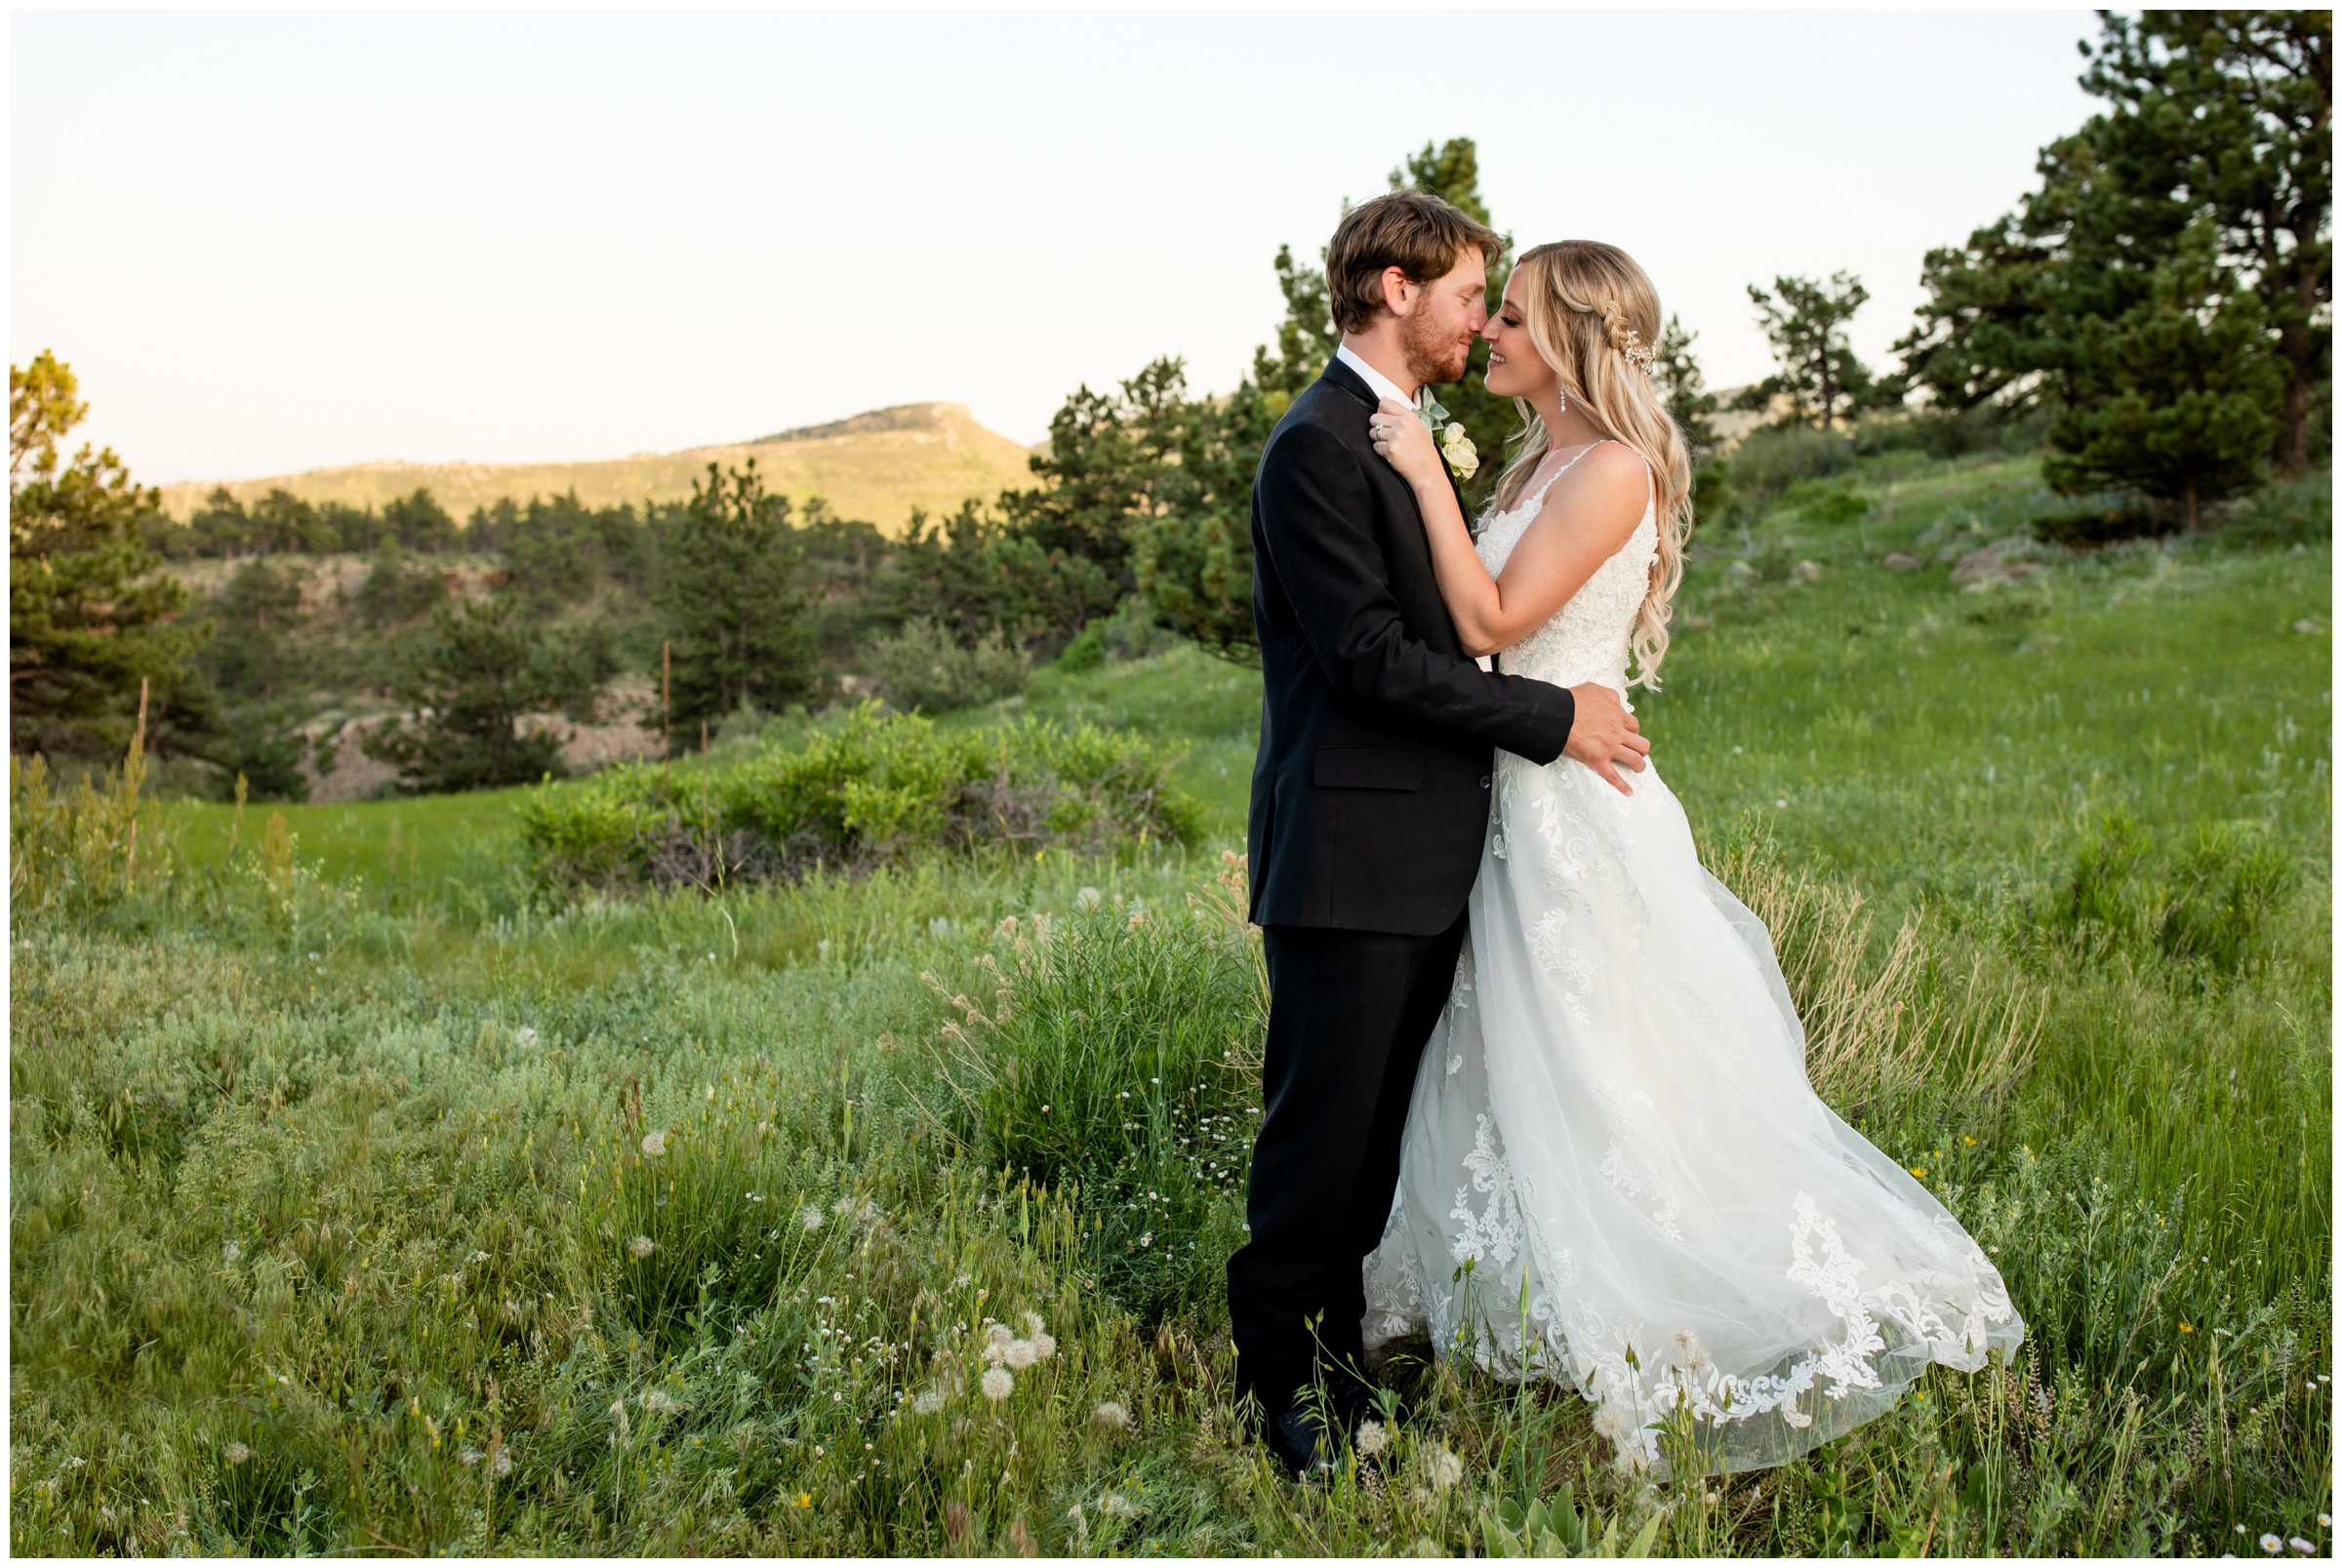 Lionscrest Manor summer wedding photos and inspiration by Lyons Colorado photographer Plum Pretty Photography